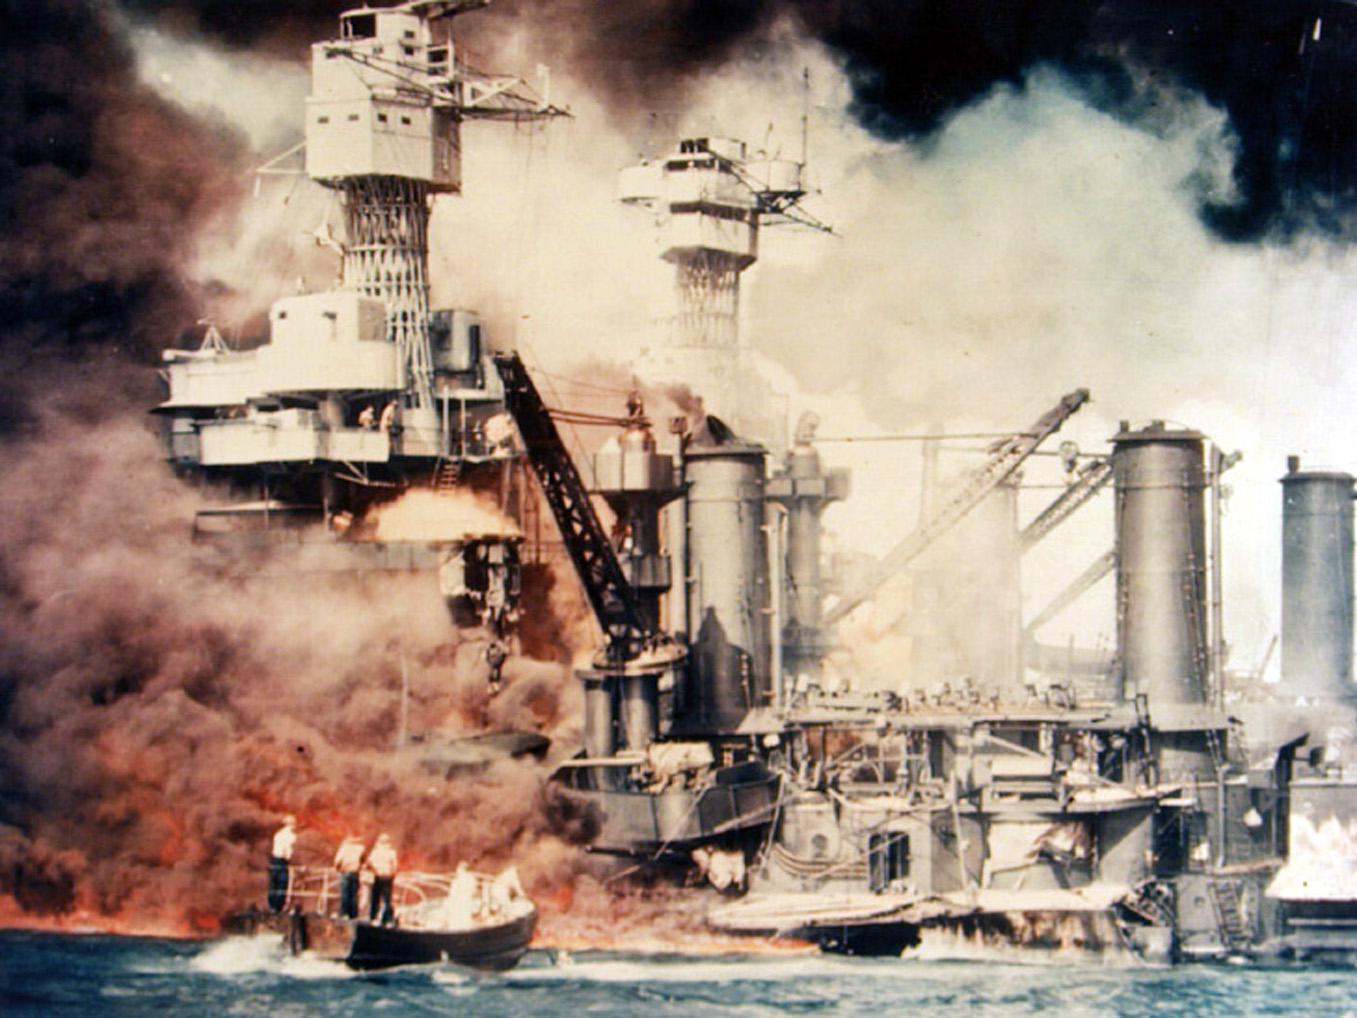 The Japanese attack on Pearl Harbor